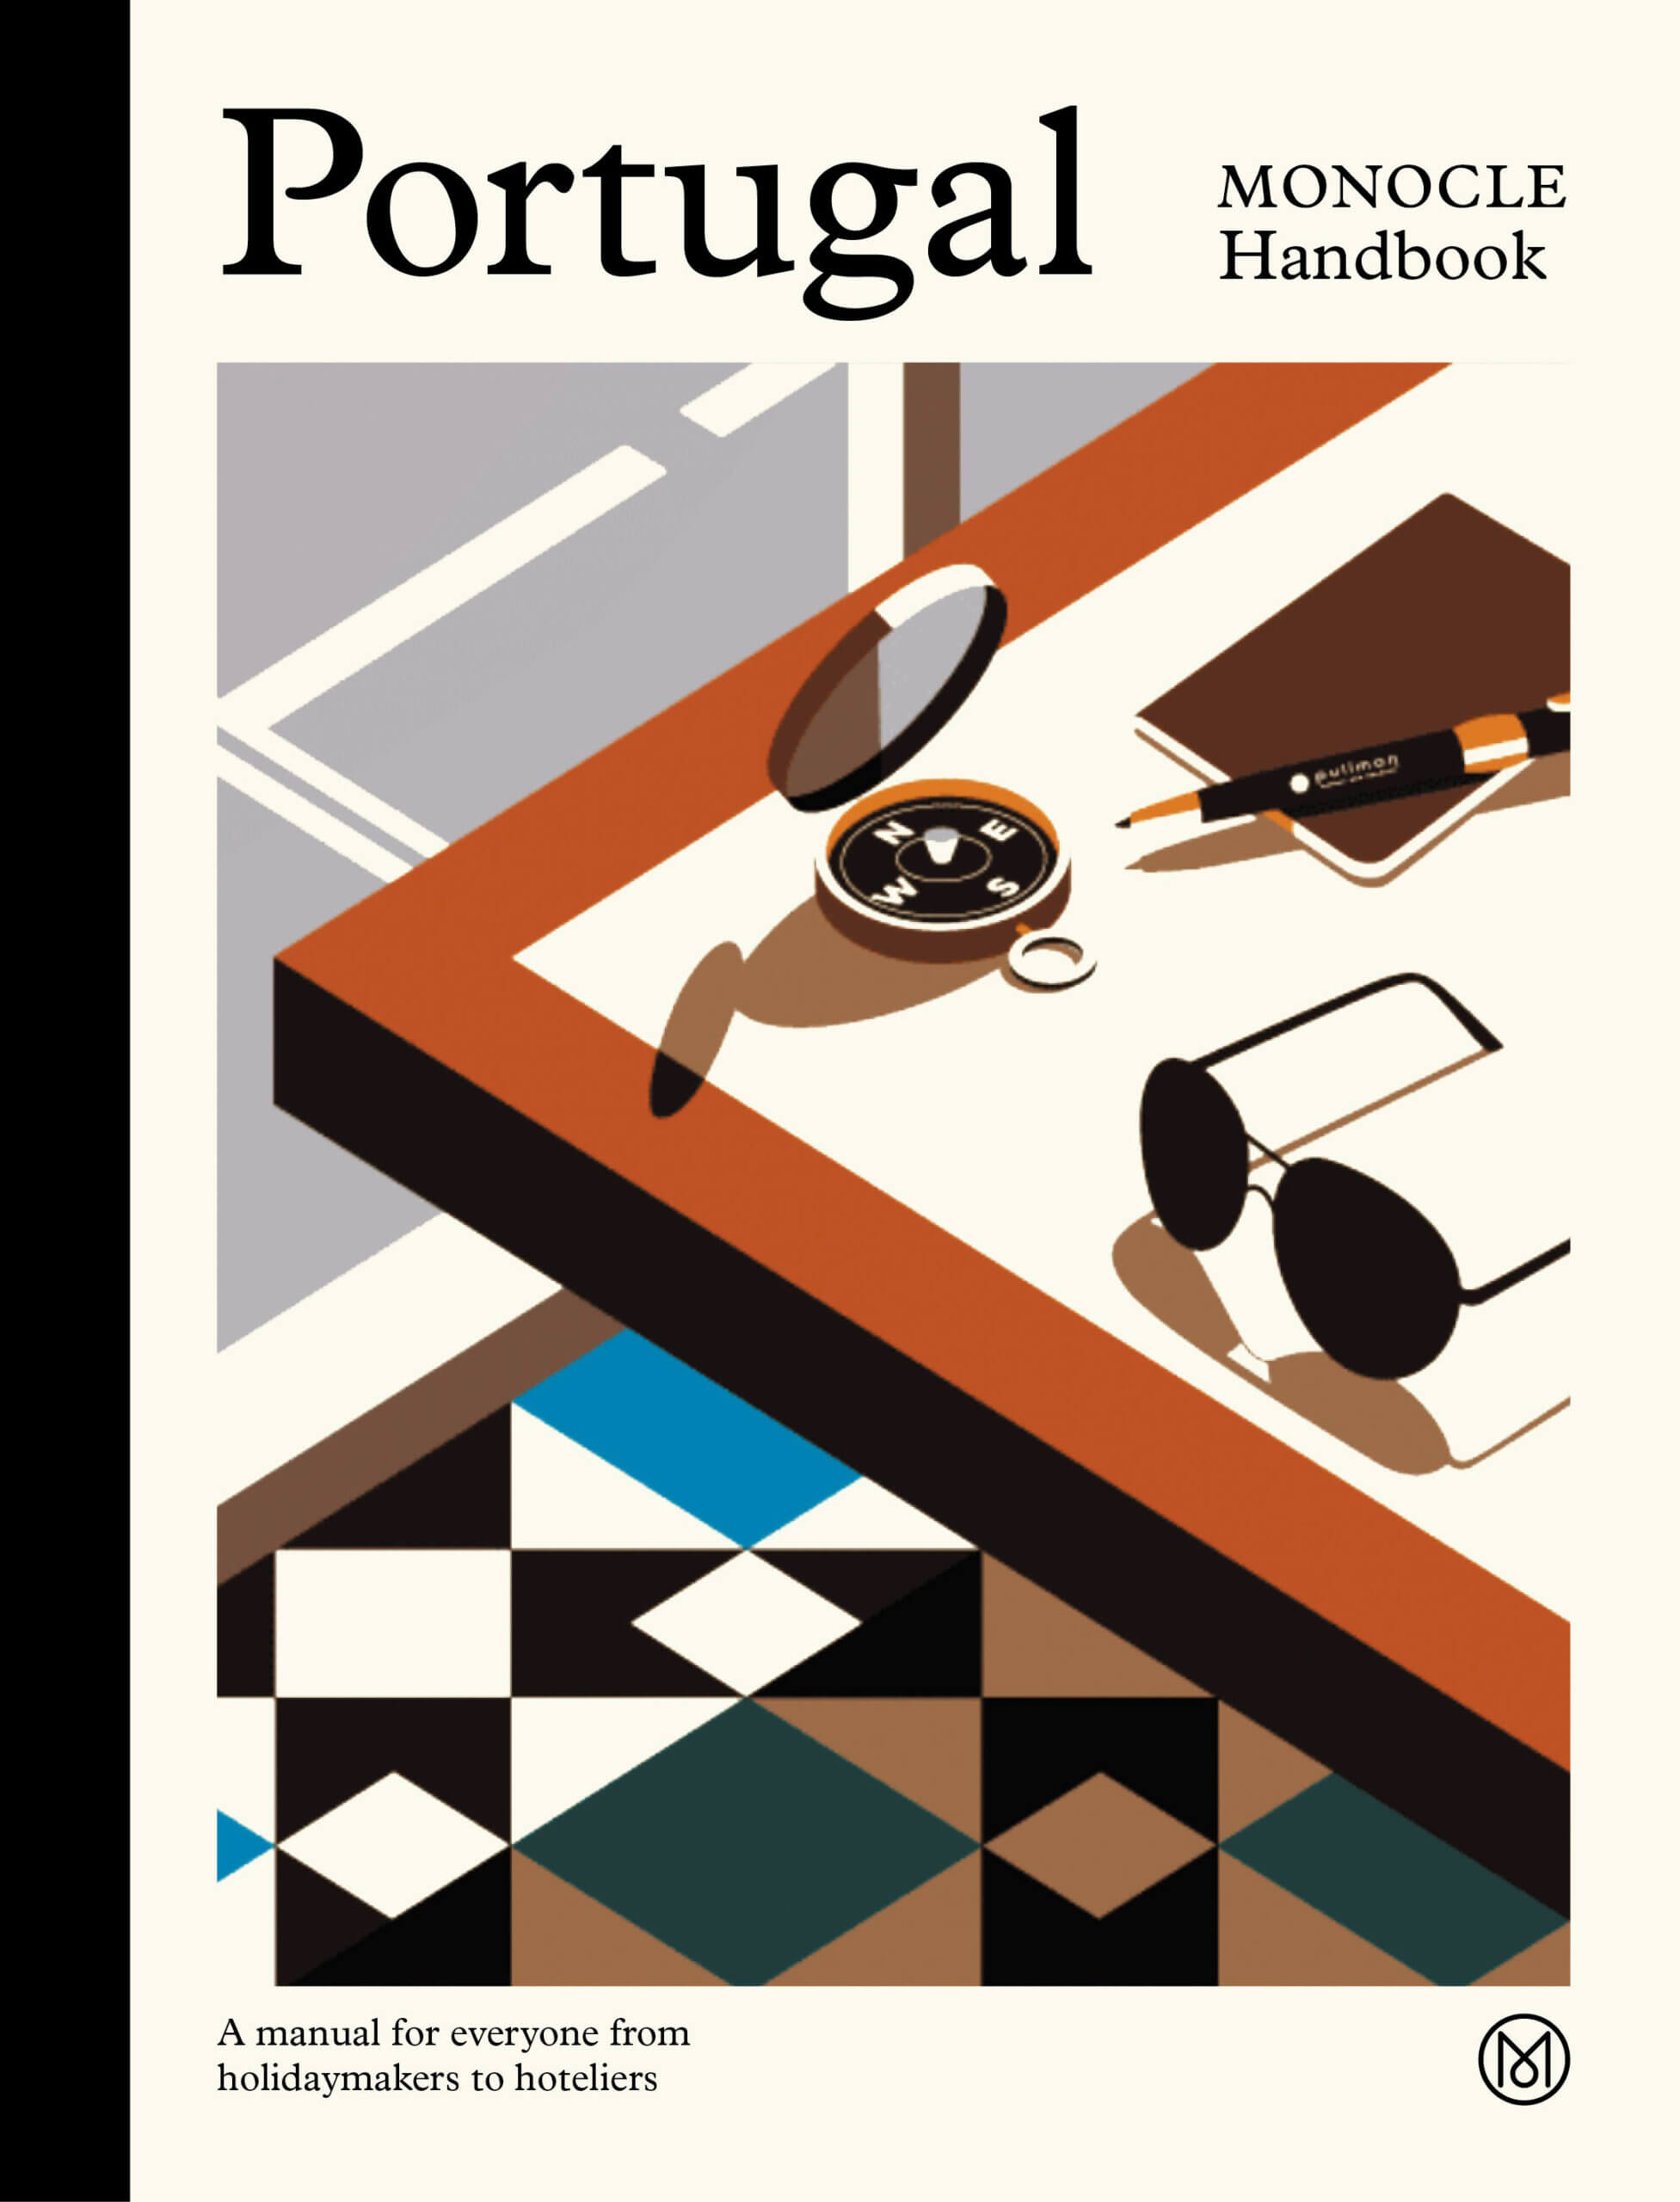 geometric shapes and simplified illustration of corner table with glasses, watch and wallet. muted colours. Cream background with title on the top printed in black, block, serif font